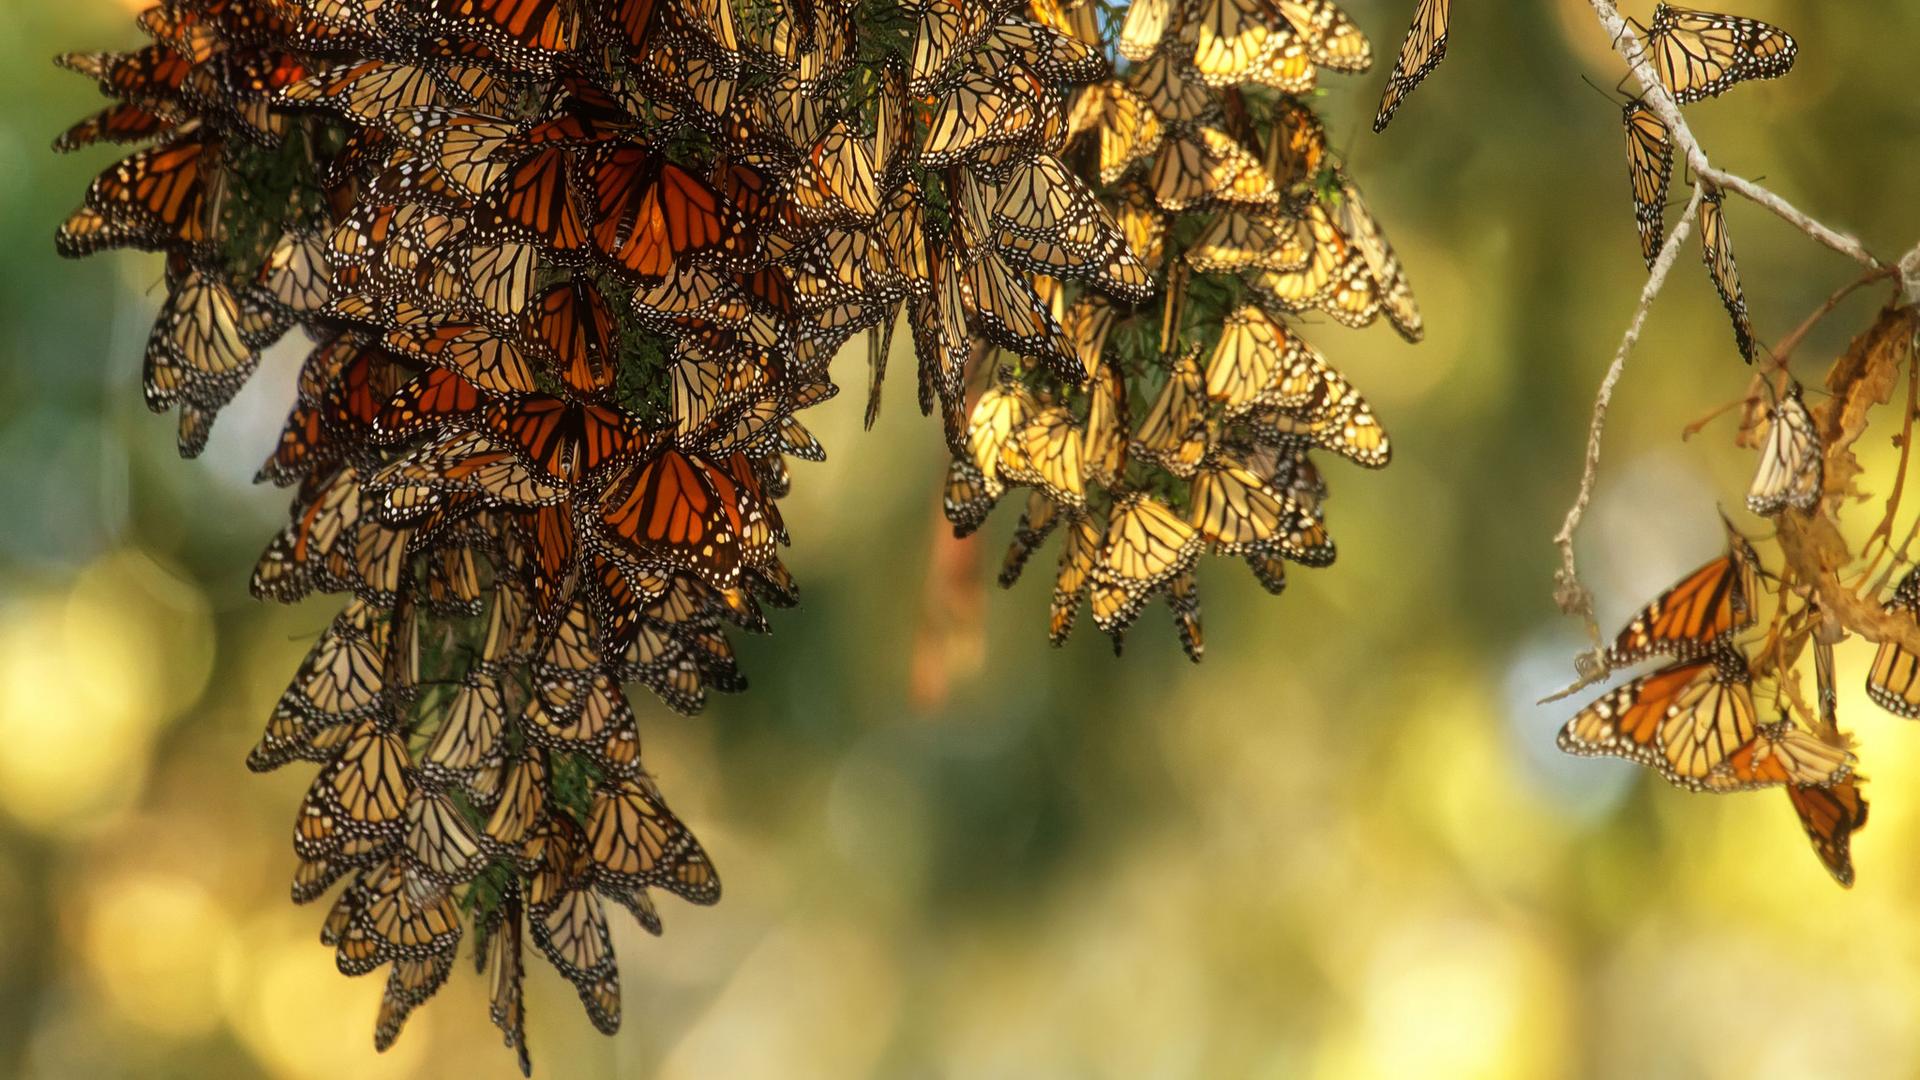 Monarch butterflies at the Pismo Beach Monarch Butterfly Grove in California.